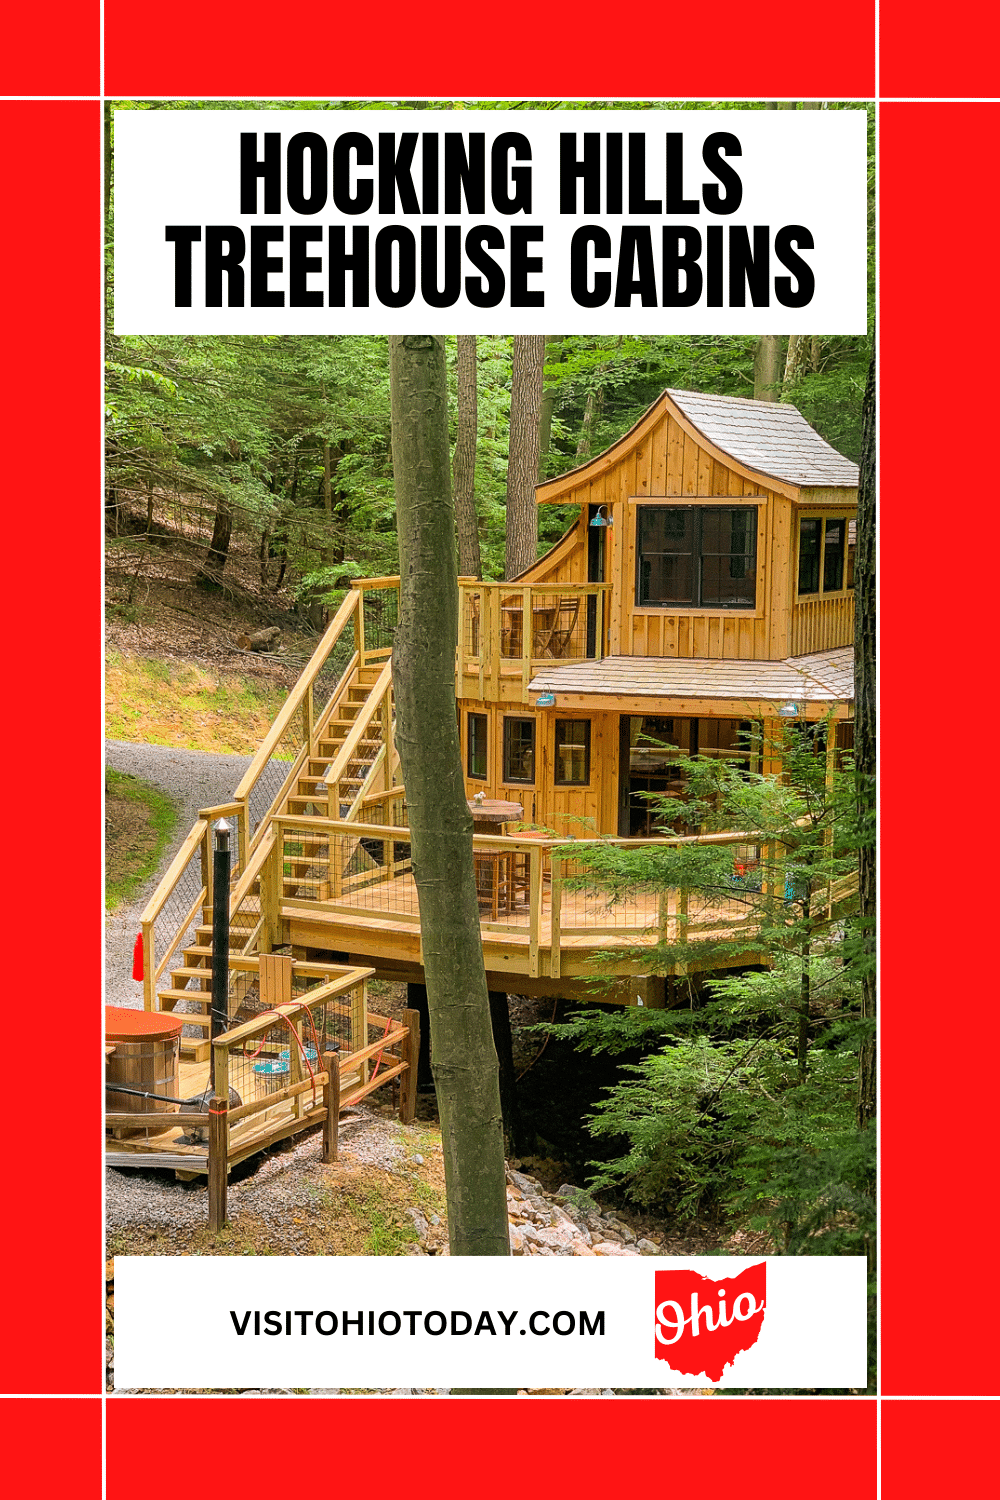 Hocking Hills Treehouse Cabins are a luxurious escape into nature with all the comforts of home. The Hocking Hills Treehouse Cabins are well built and have all the amenities you need for a relaxing elevated getaway.